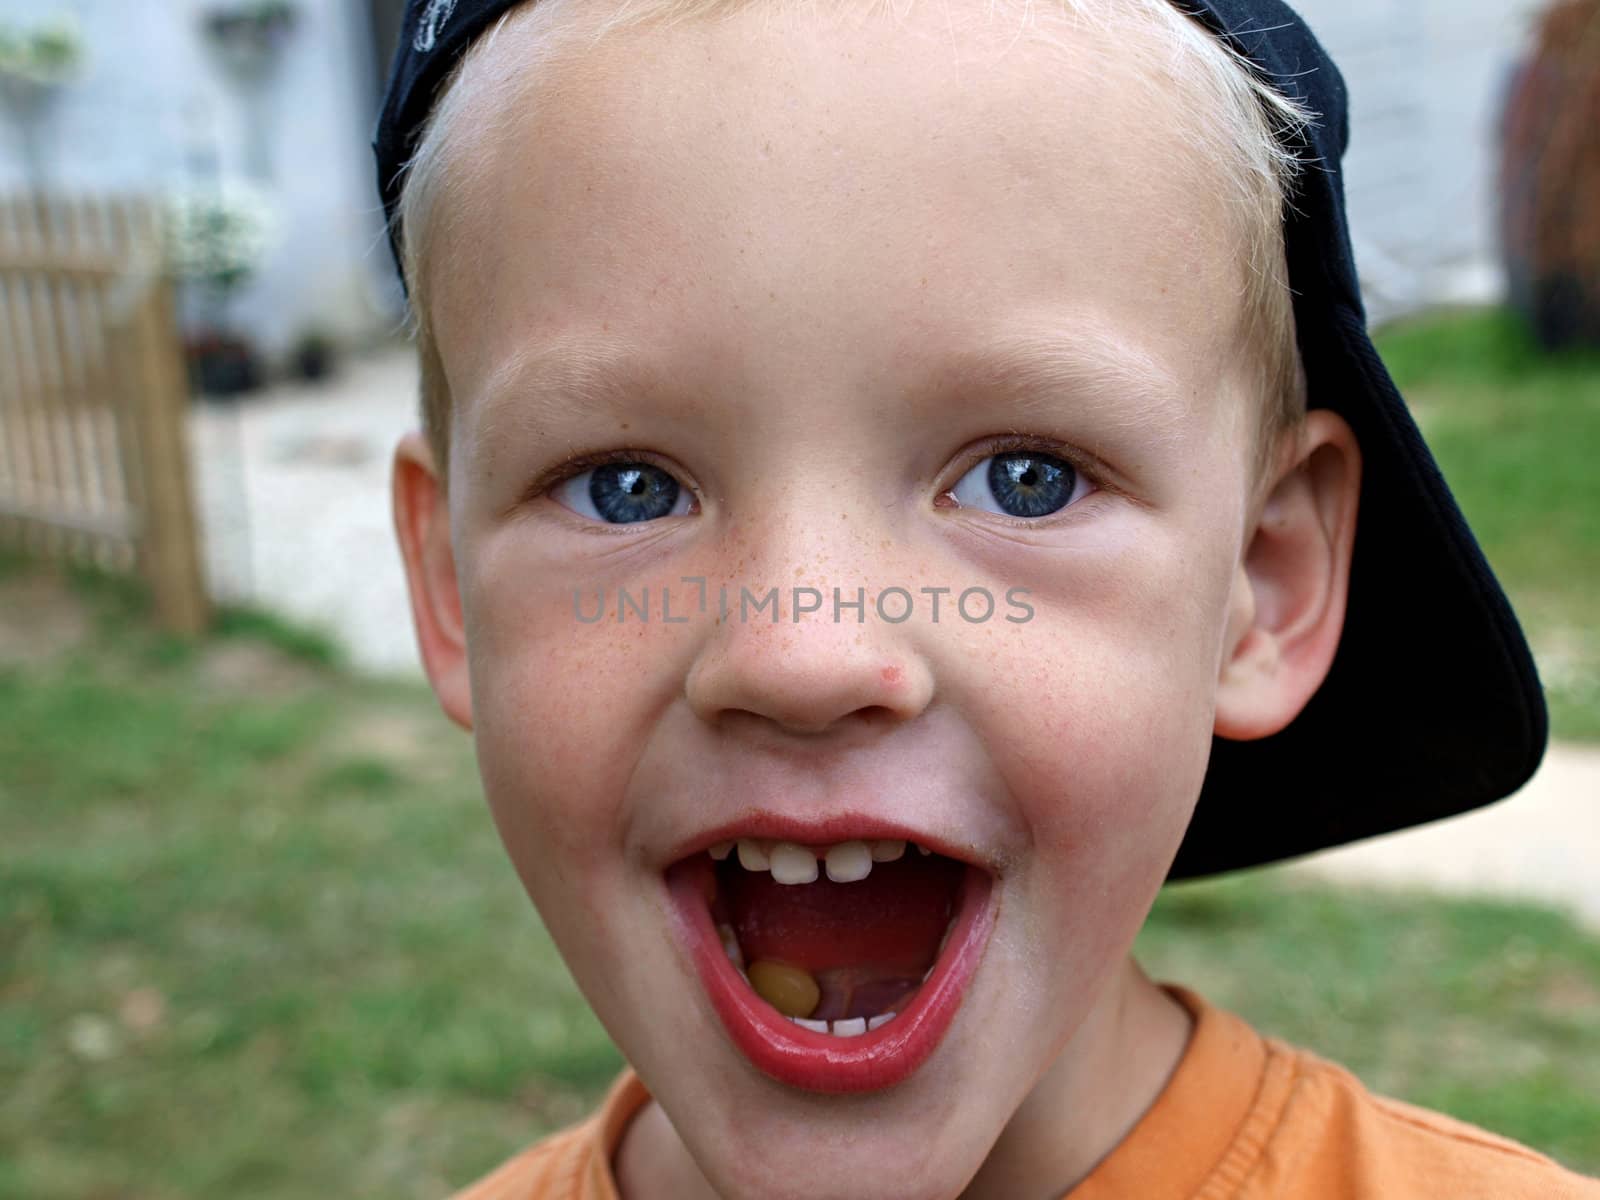 Cute happy smiling beautiful young boy - Life is good!